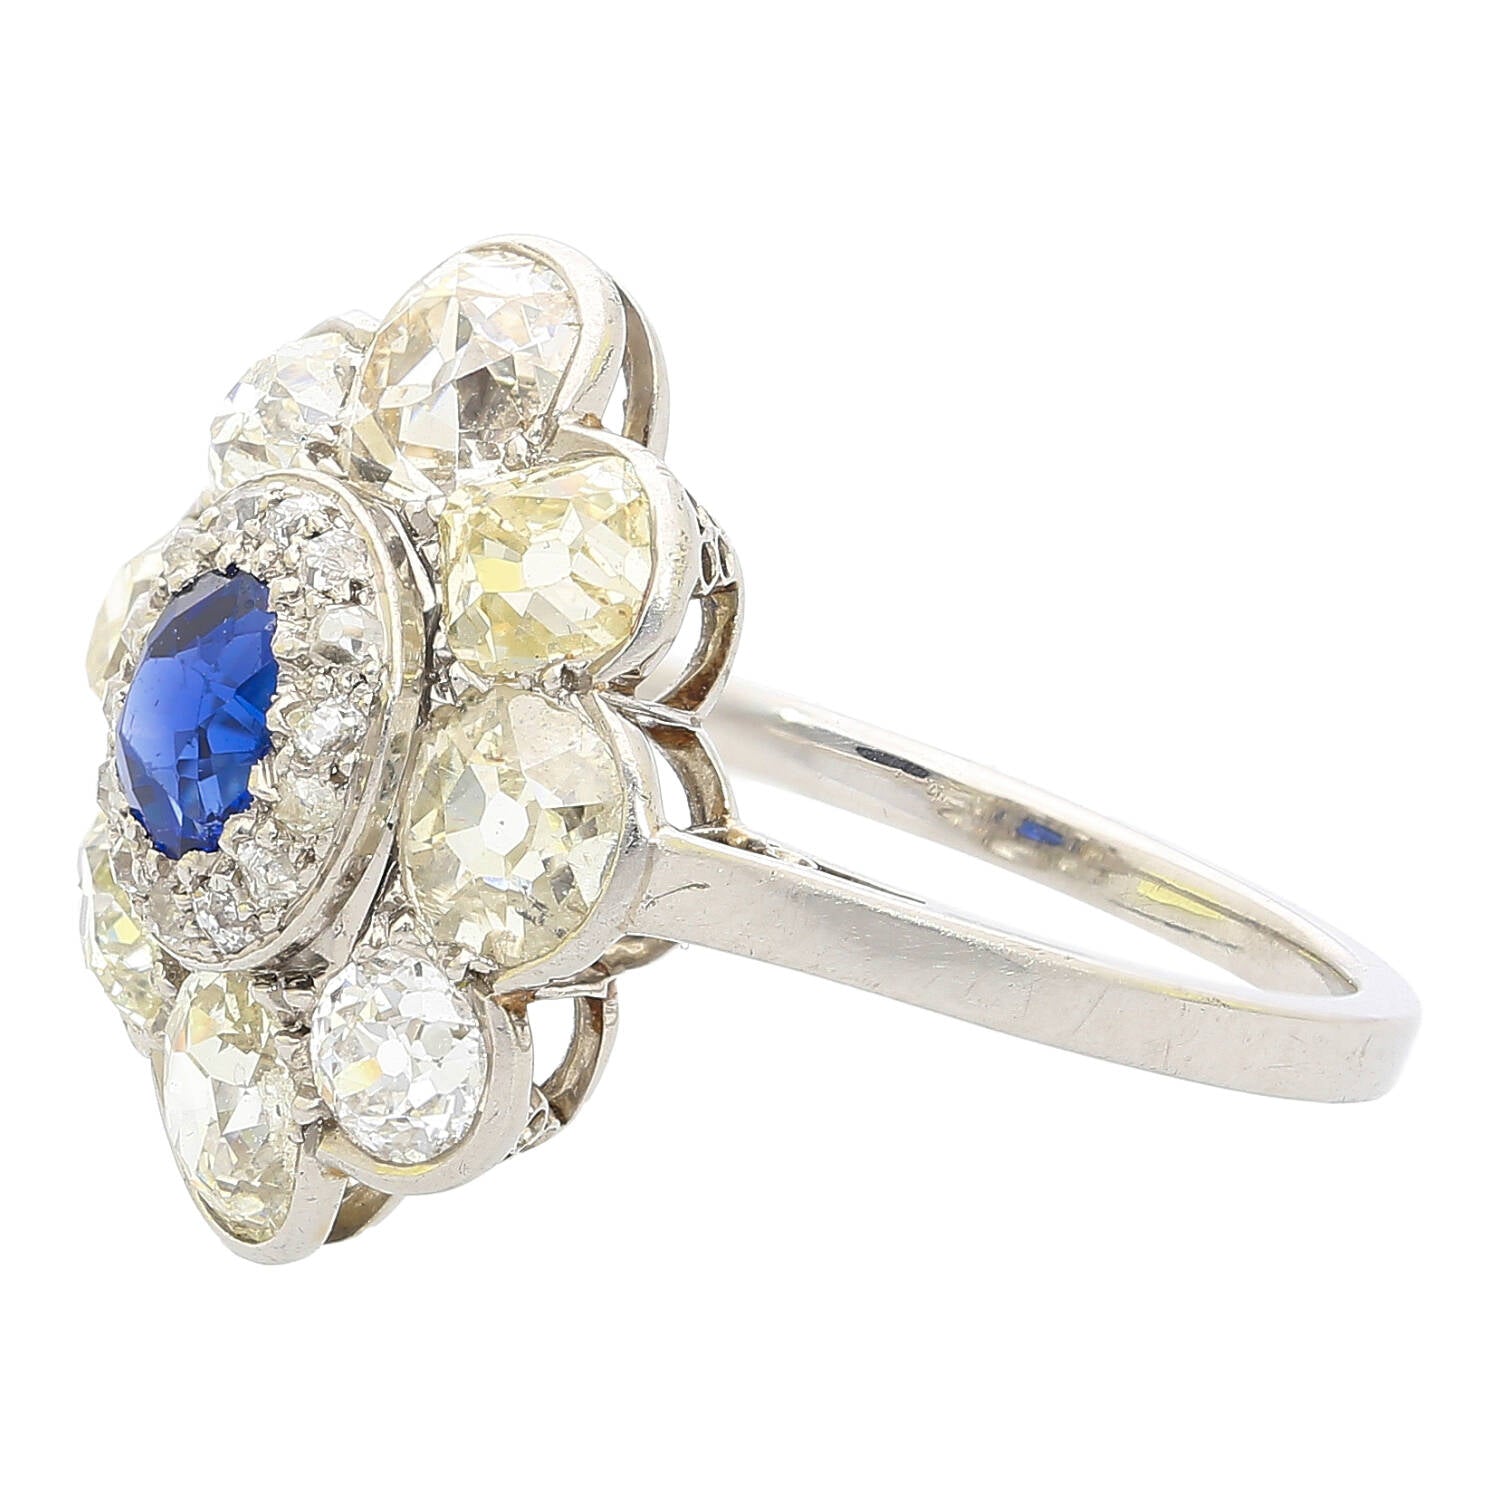 Vintage-AGL-Certified-No-Heat-Burma-Blue-Sapphire-and-Old-Euro-Cut-Diamond-Ring-in-Platinum-Rings-2.jpg